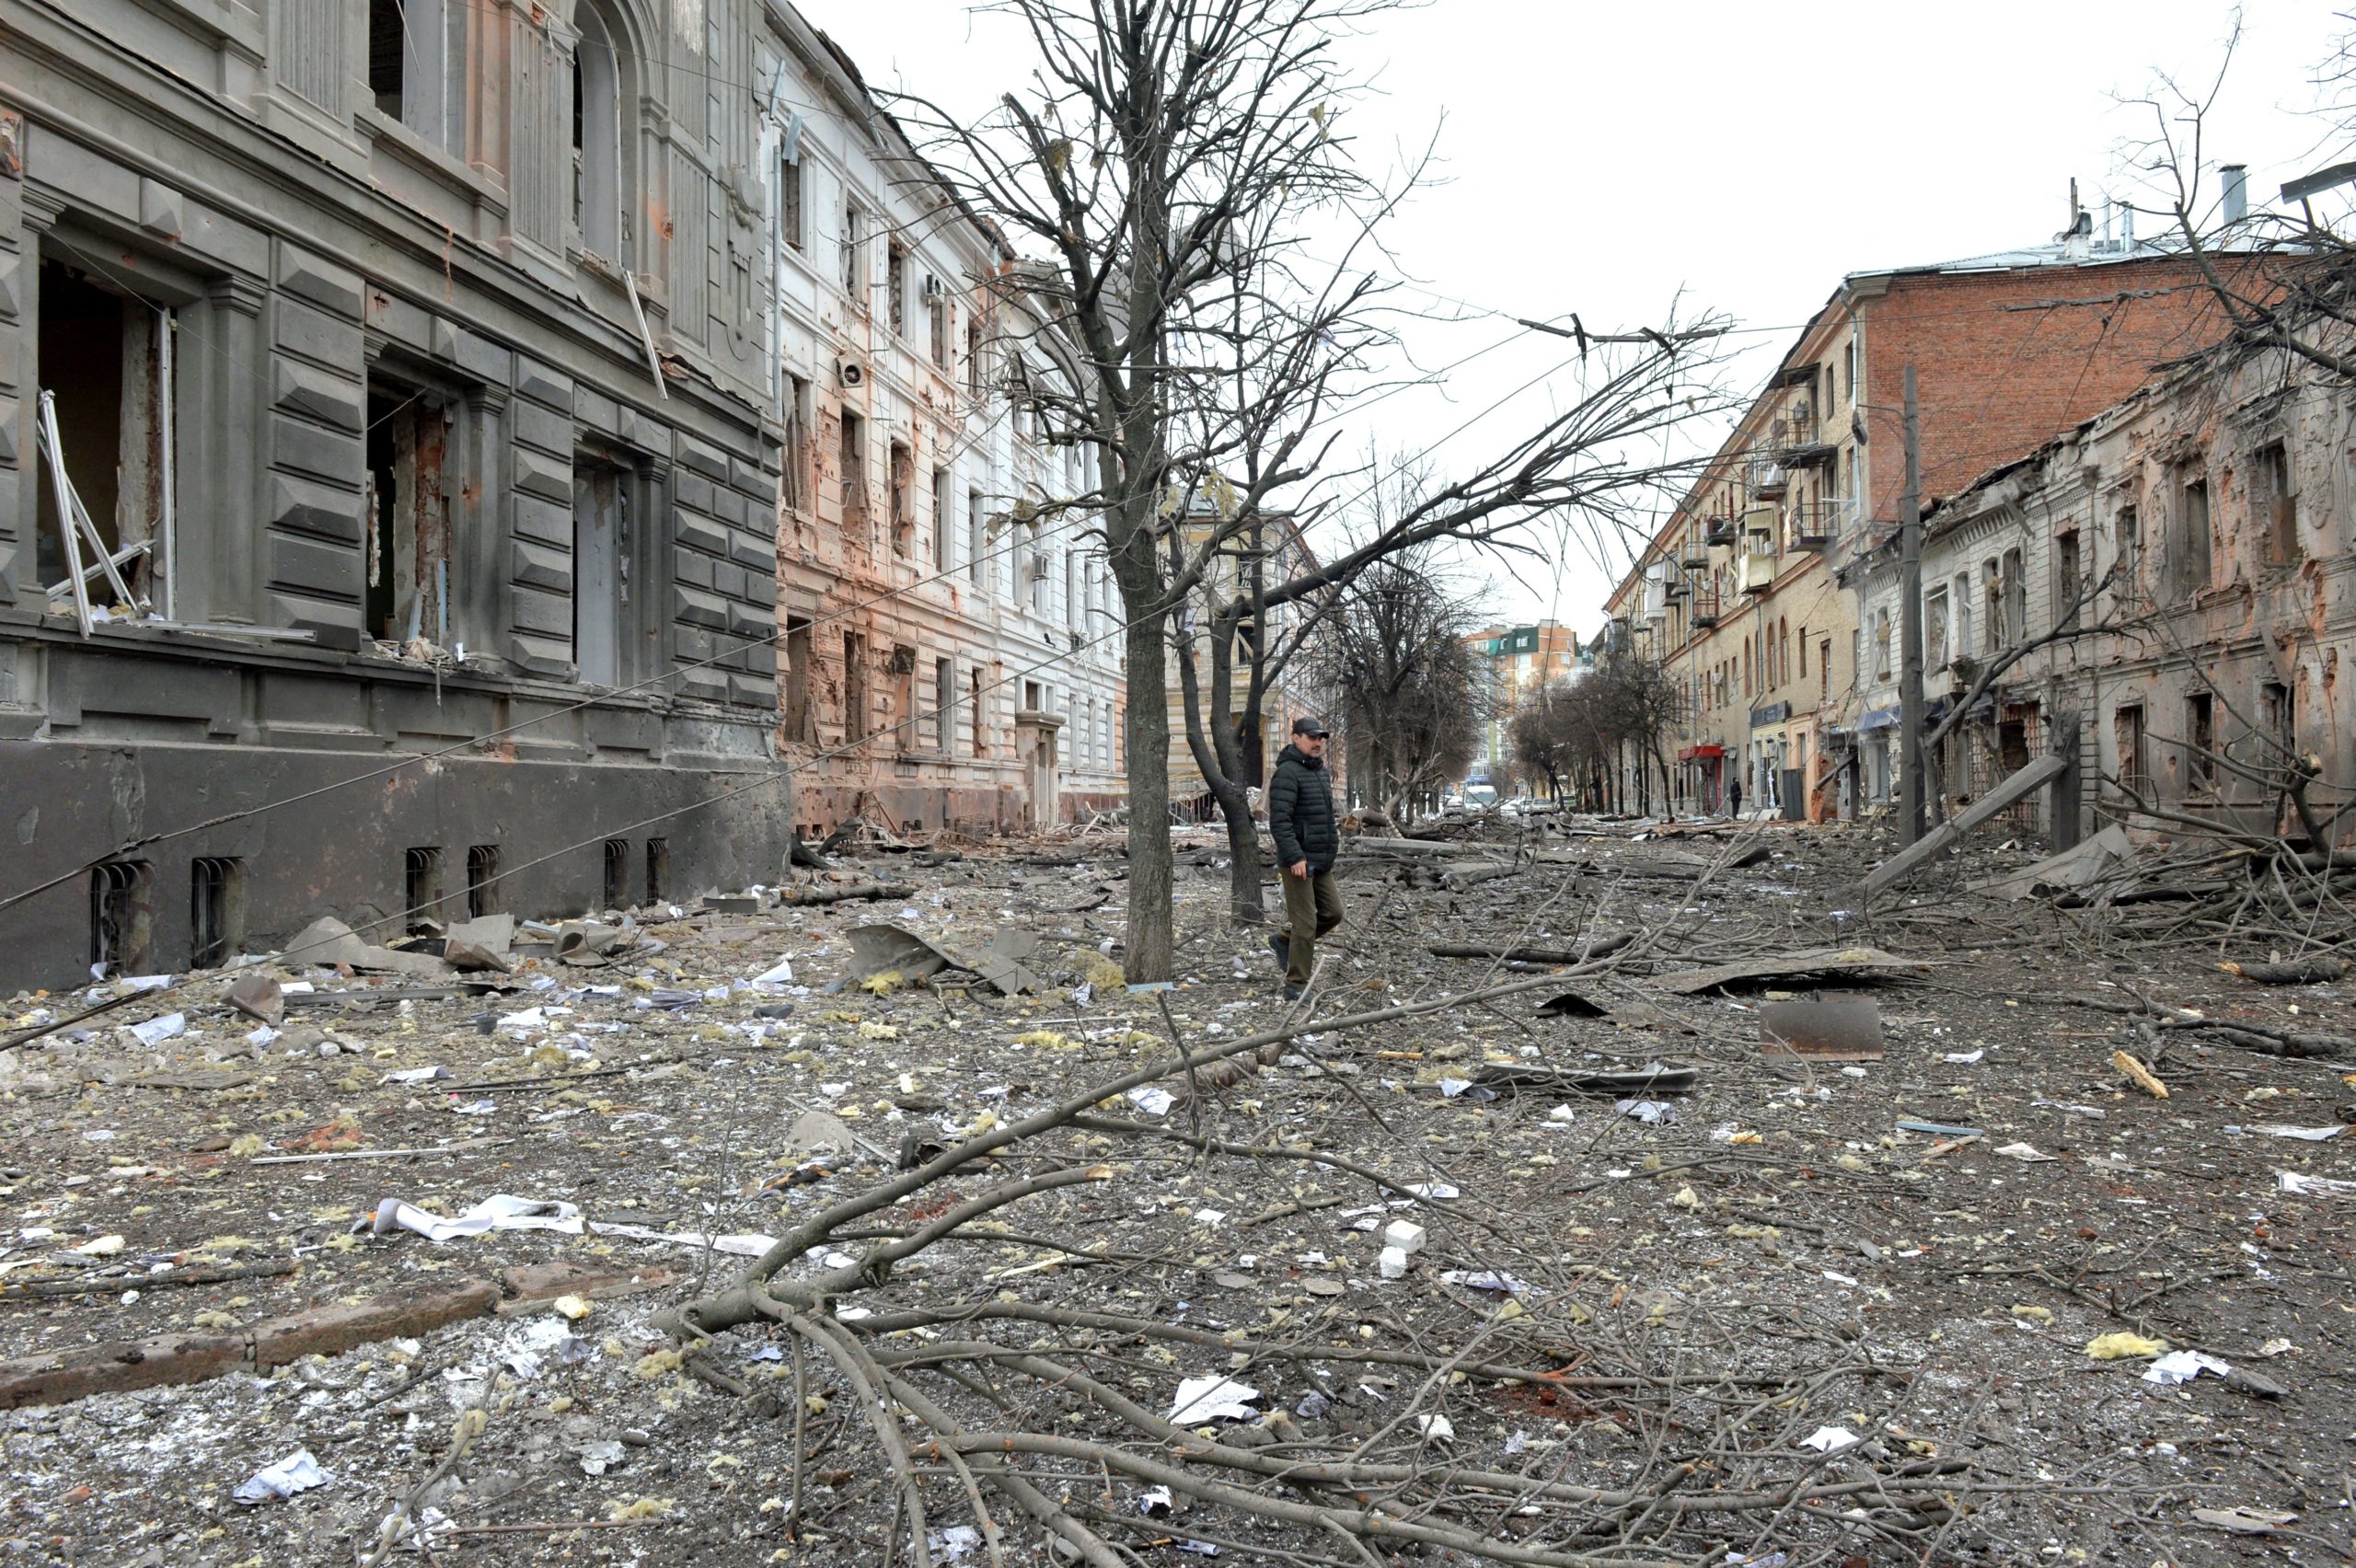 TOPSHOT - A pedestrian walks amid debris in a street following a shelling in Ukraine's second-biggest city of Kharkiv on March 7, 2022. - On the 12th day of Russia's invasion of Ukraine March 7, 2022, Russian forces pressed a siege of the key southern port of Mariupol and sought to increase pressure on the capital Kyiv. Kyiv remains under Ukrainian control as does Kharkiv in the east, with the overall Russian ground advance little changed over the last 24 hours in the face of fierce Ukrainian resistance. (Photo by Sergey BOBOK / AFP) (Photo by SERGEY BOBOK/AFP via Getty Images)